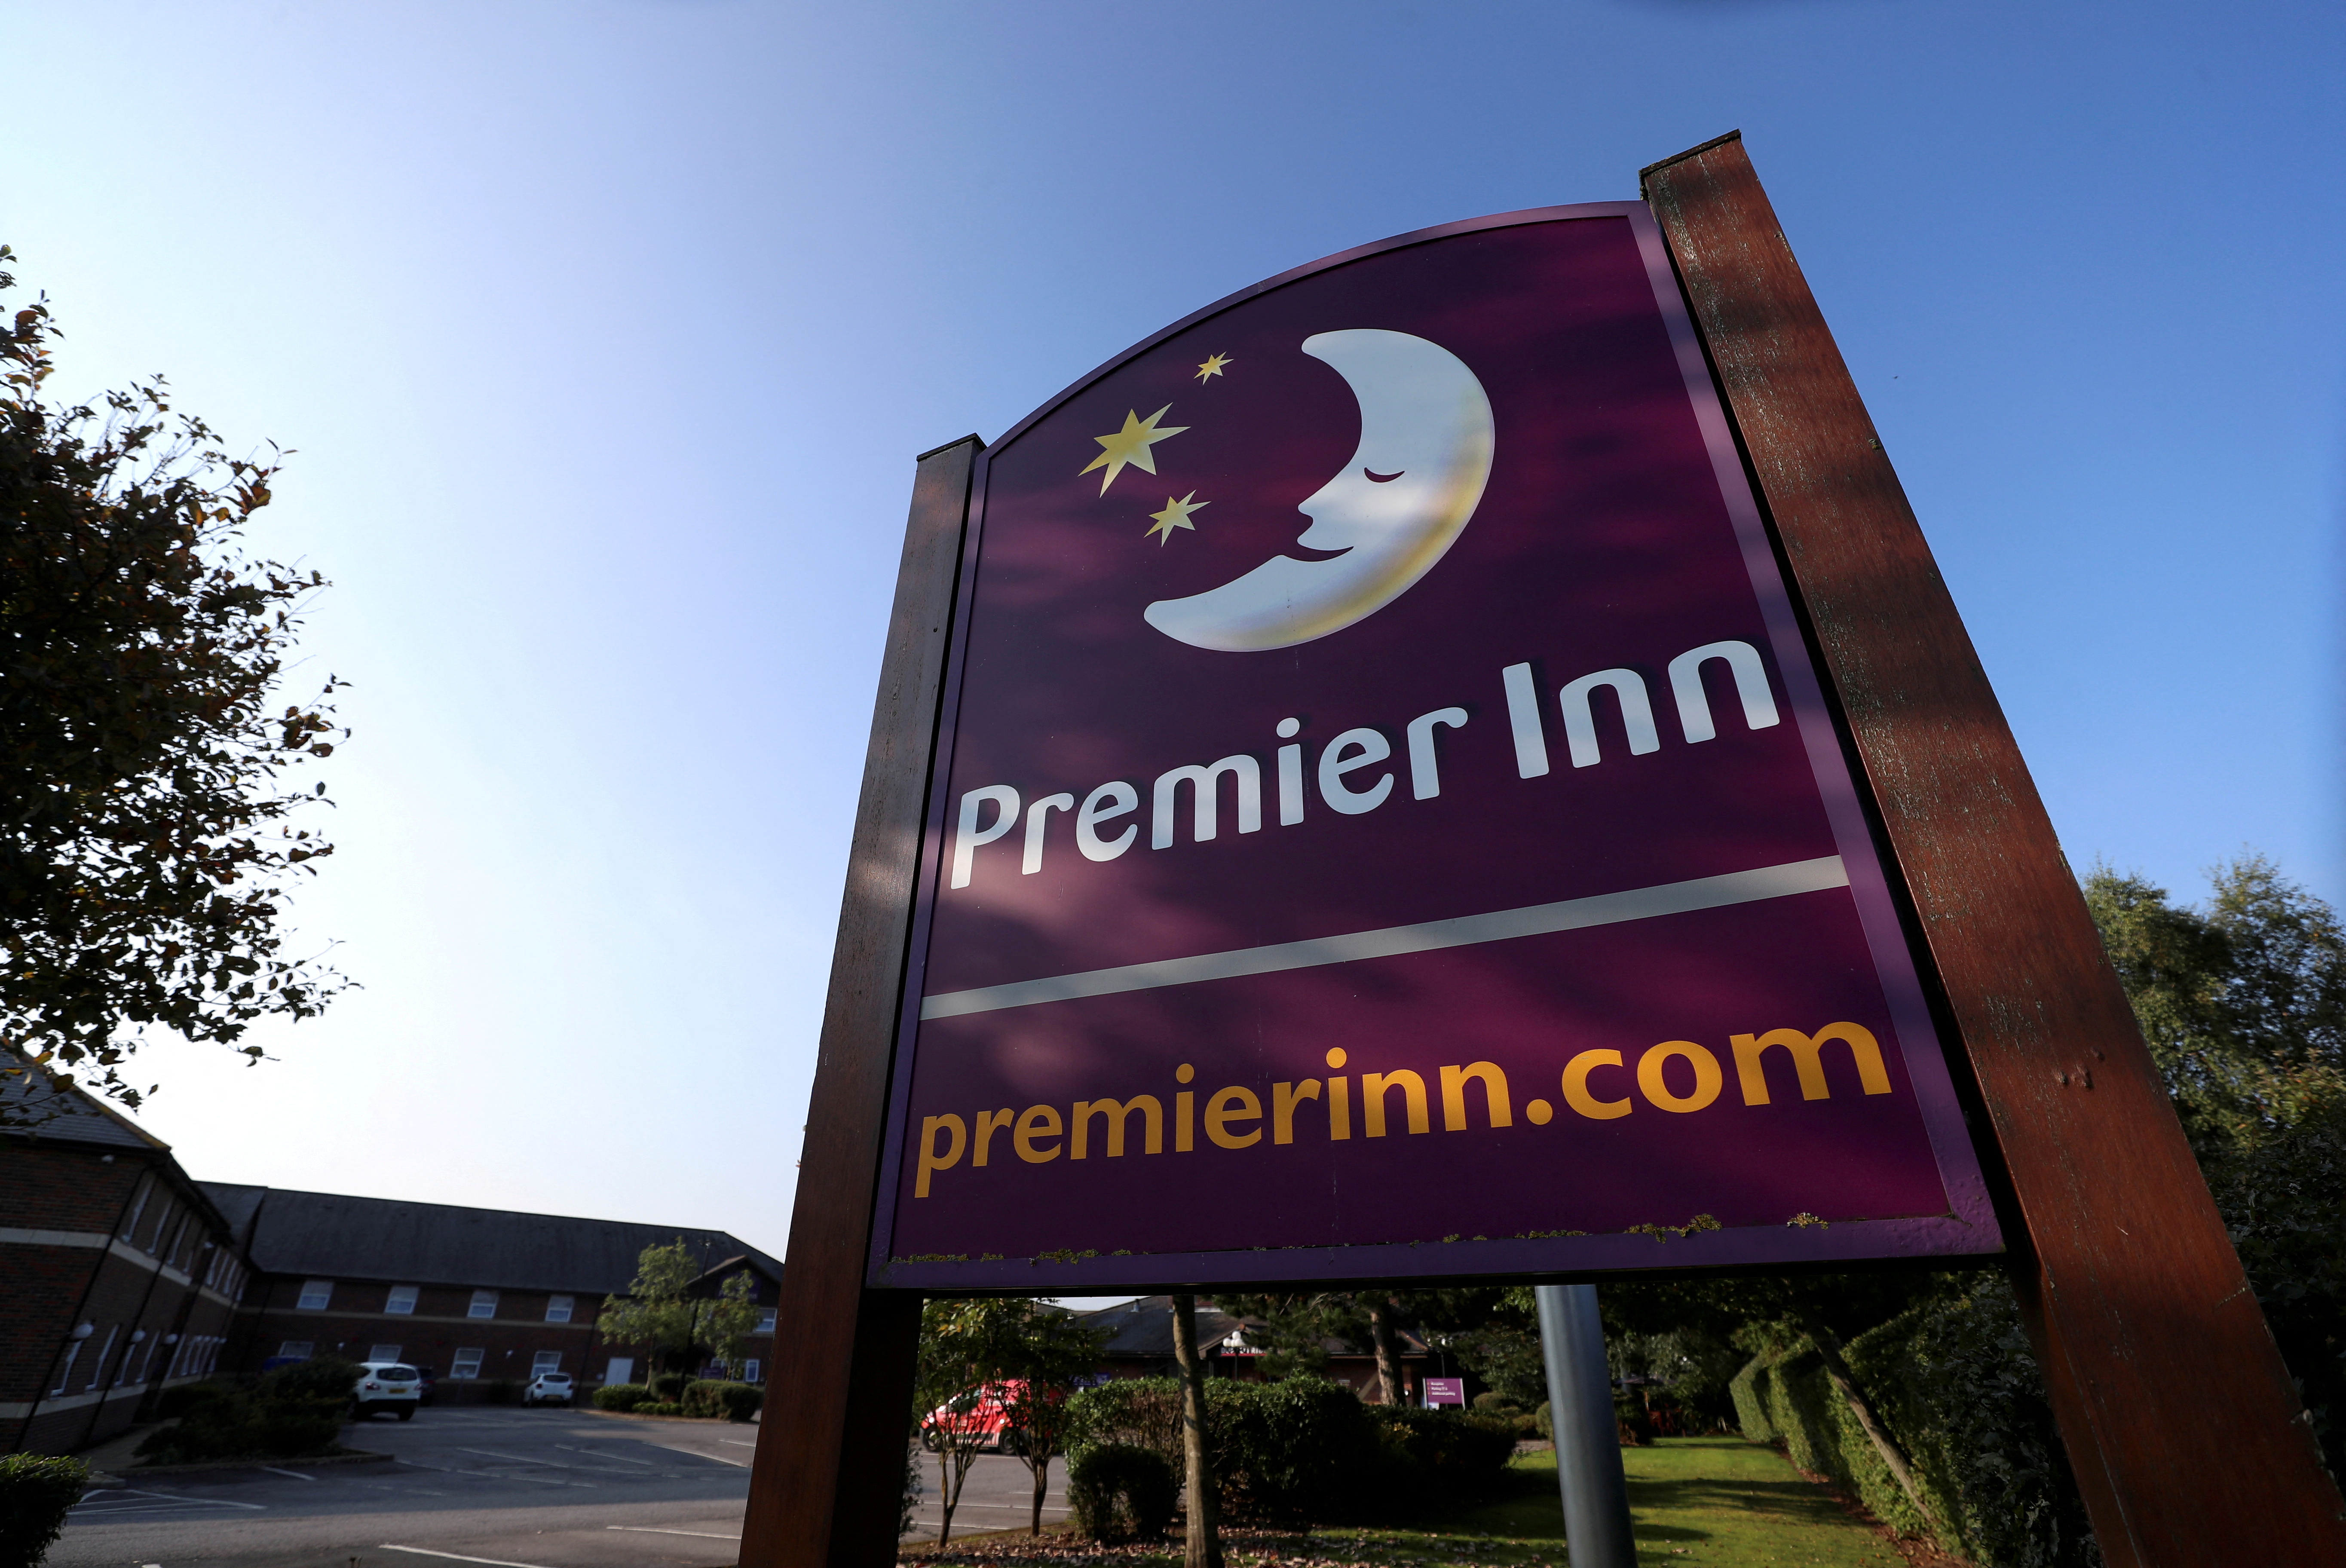 A signage of the Premier Inn Hotel is seen outside the Durham North branch, in County Durham